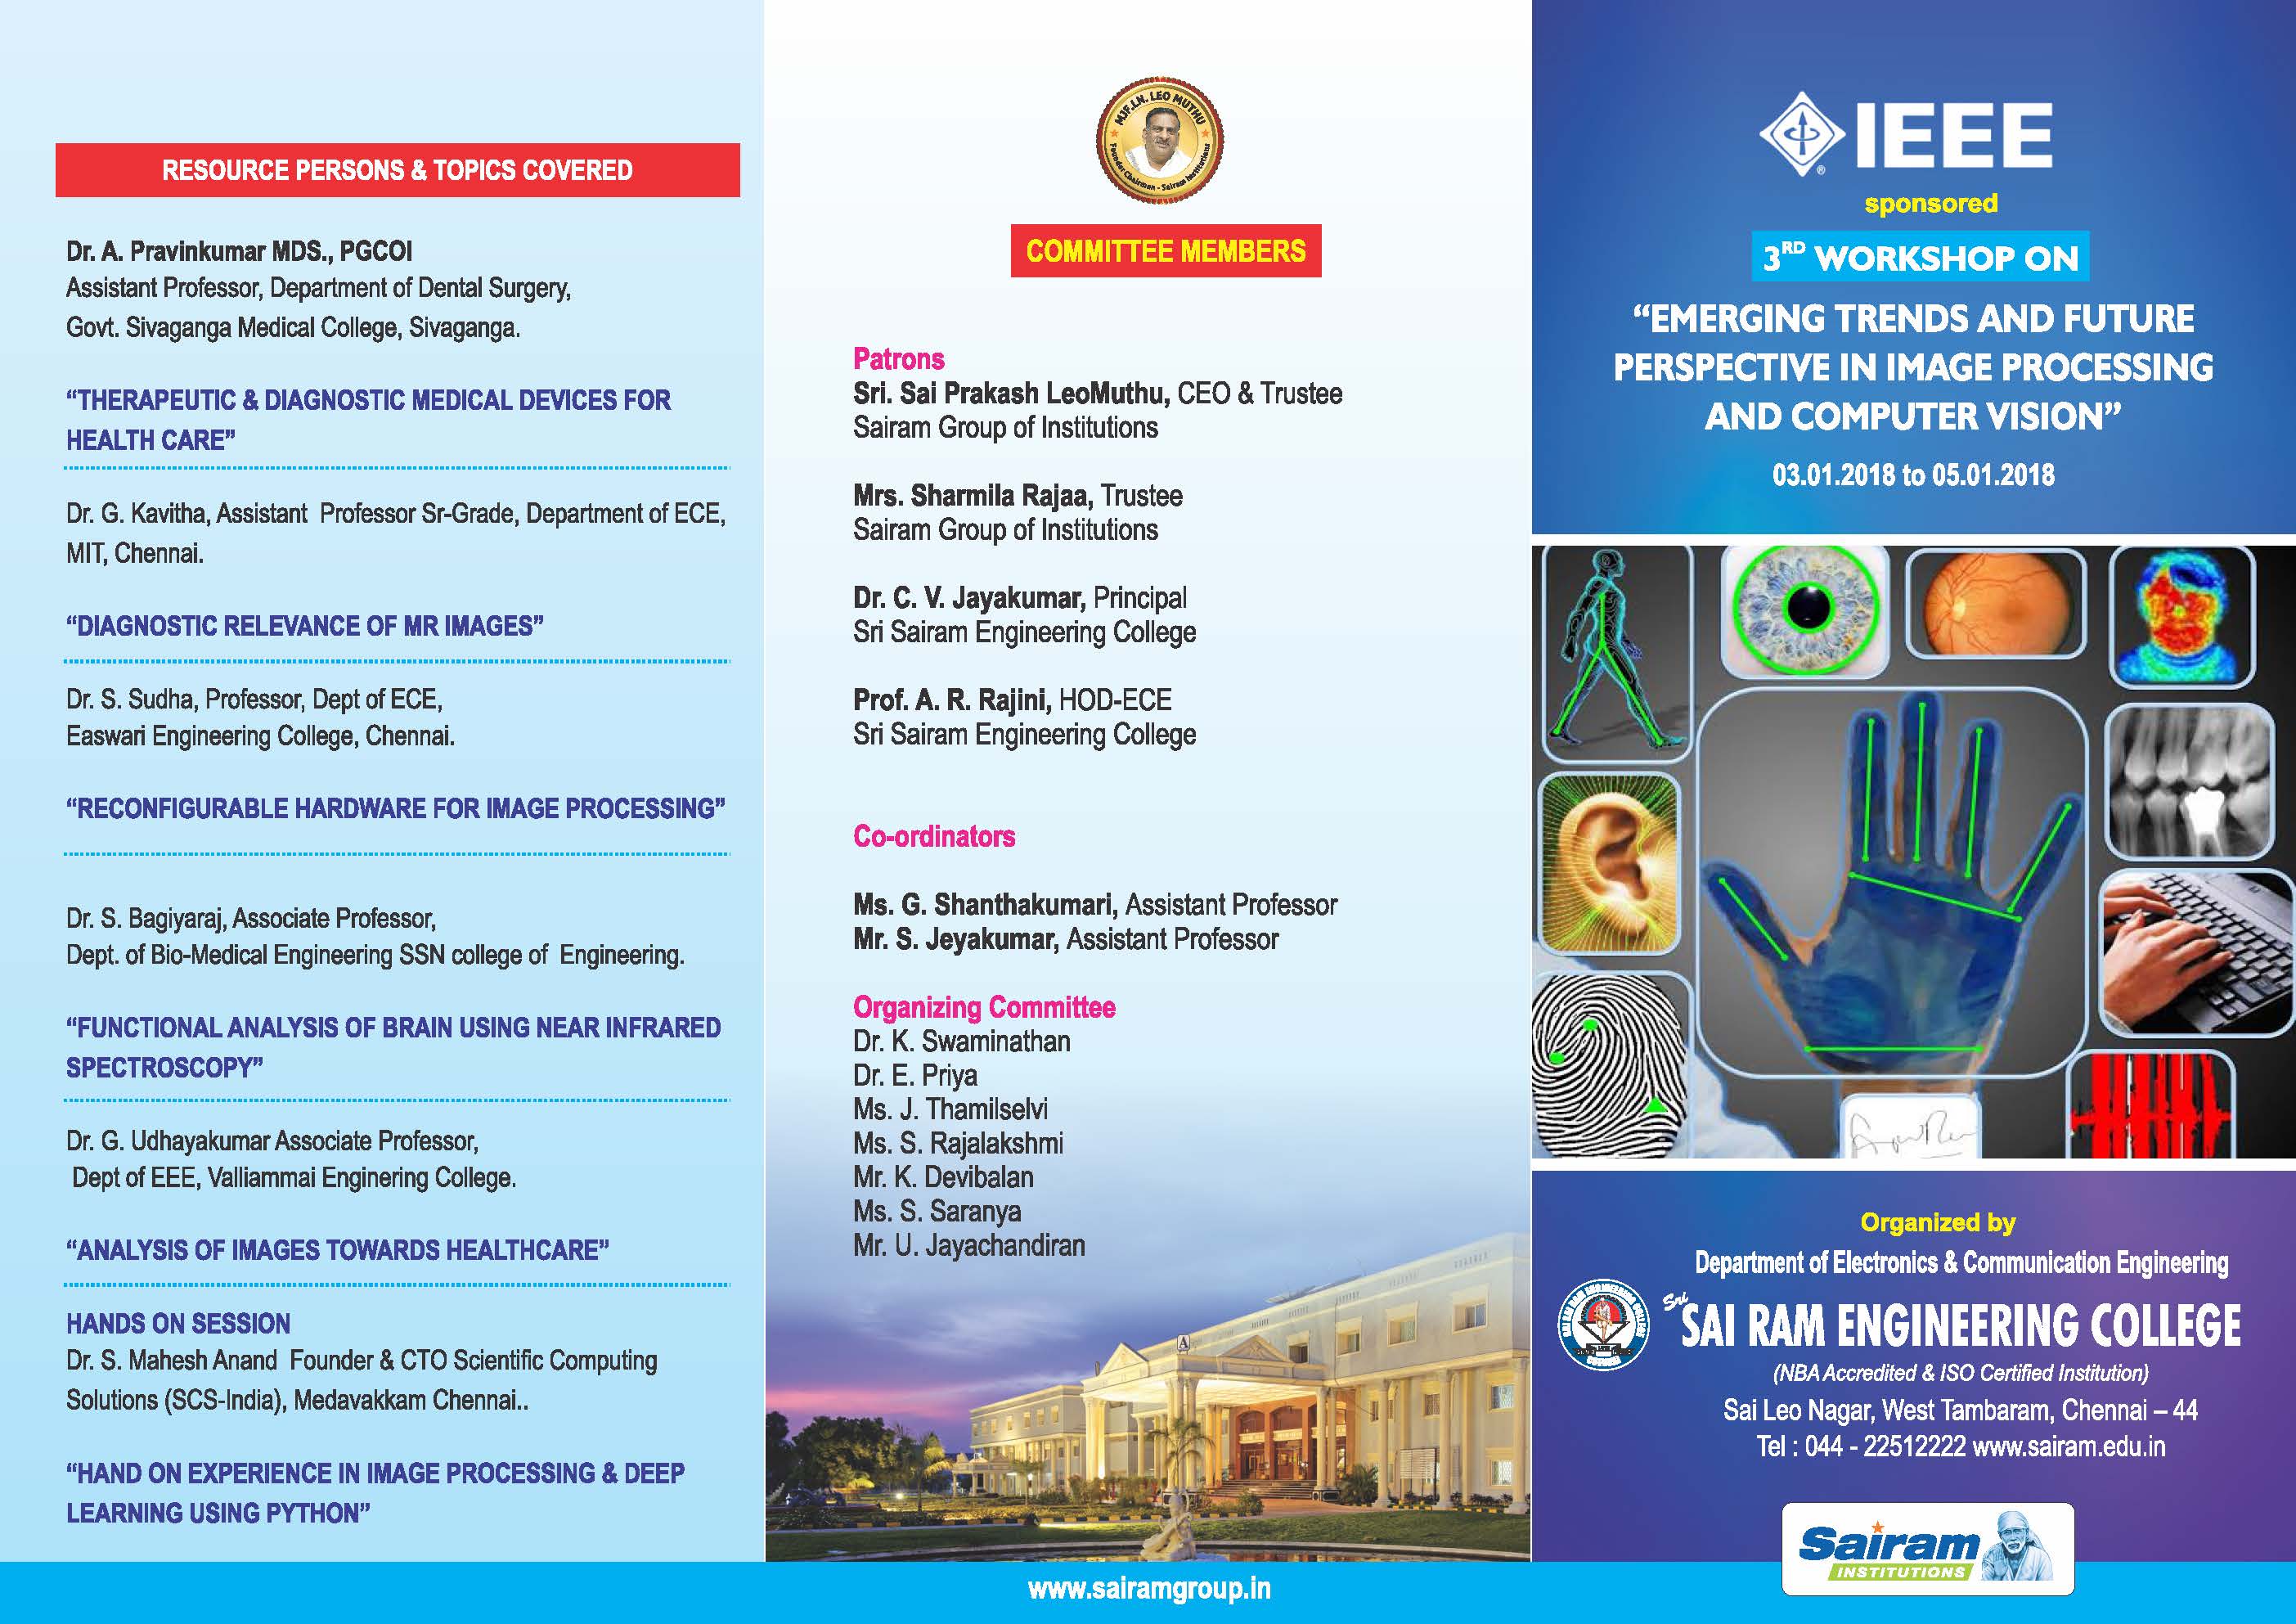 : IEEE Sponsored 3rd Workshop on Emerging Trends and Future Perspective in Image Processing and Computer Vision